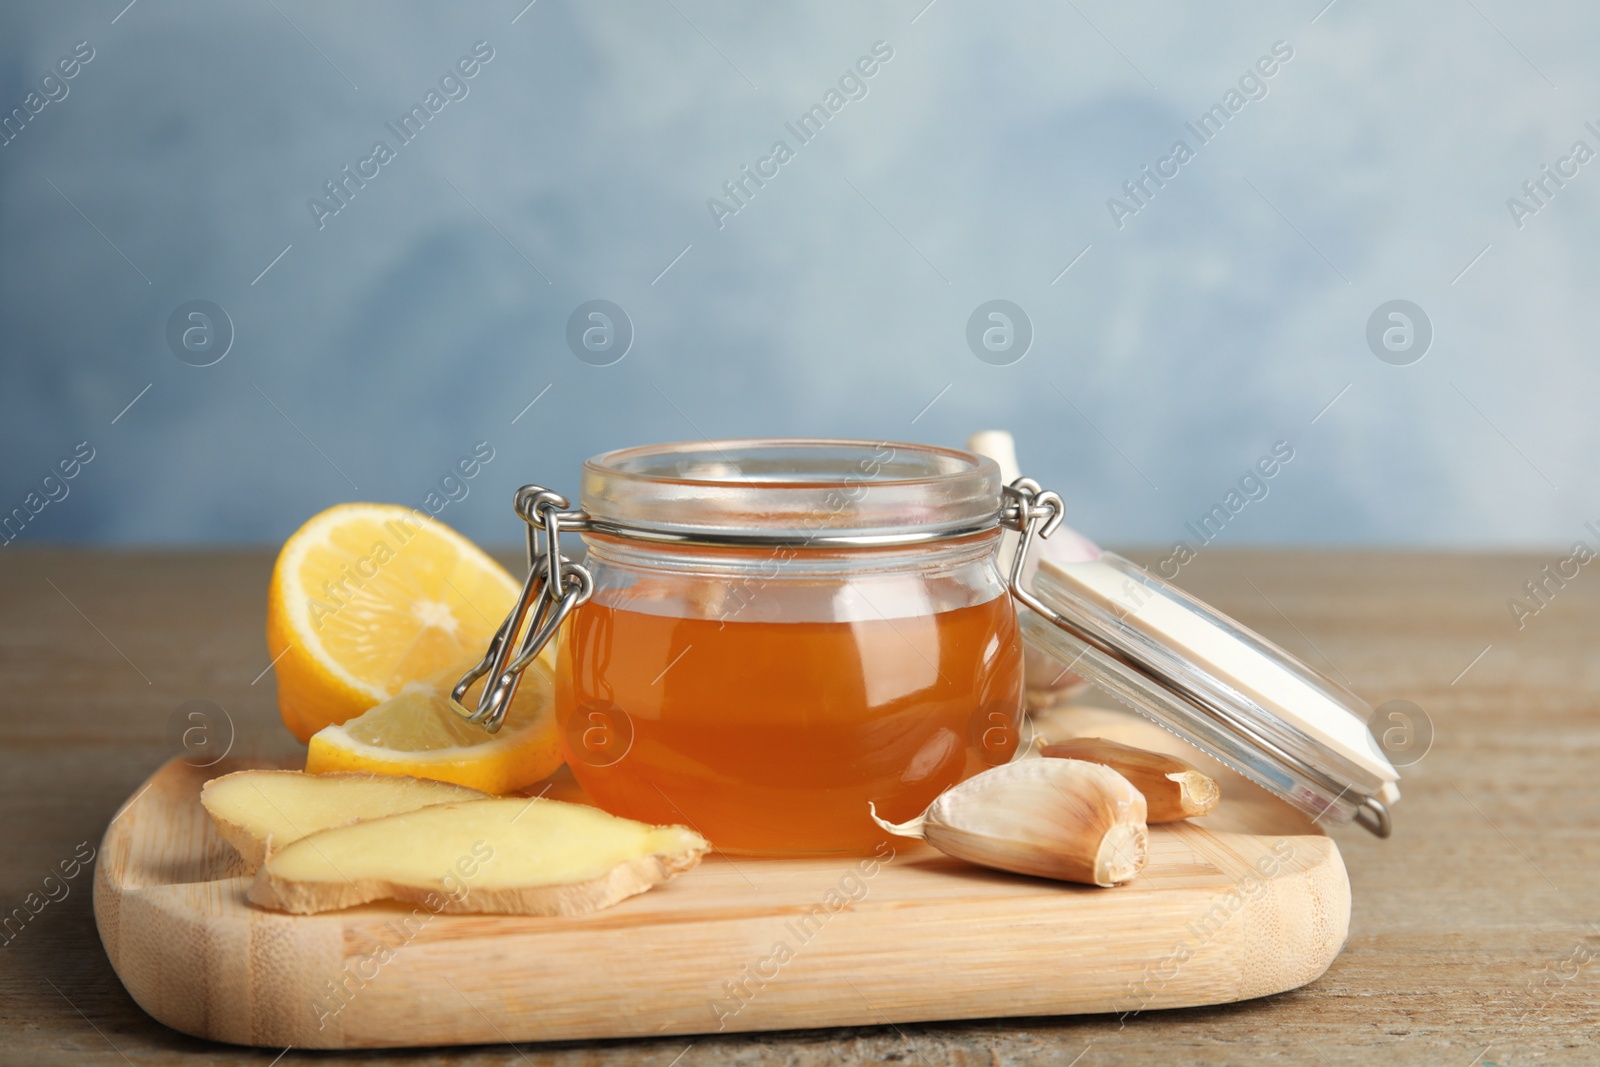 Photo of Cold remedies on wooden table against blue background. Sore throat treatment